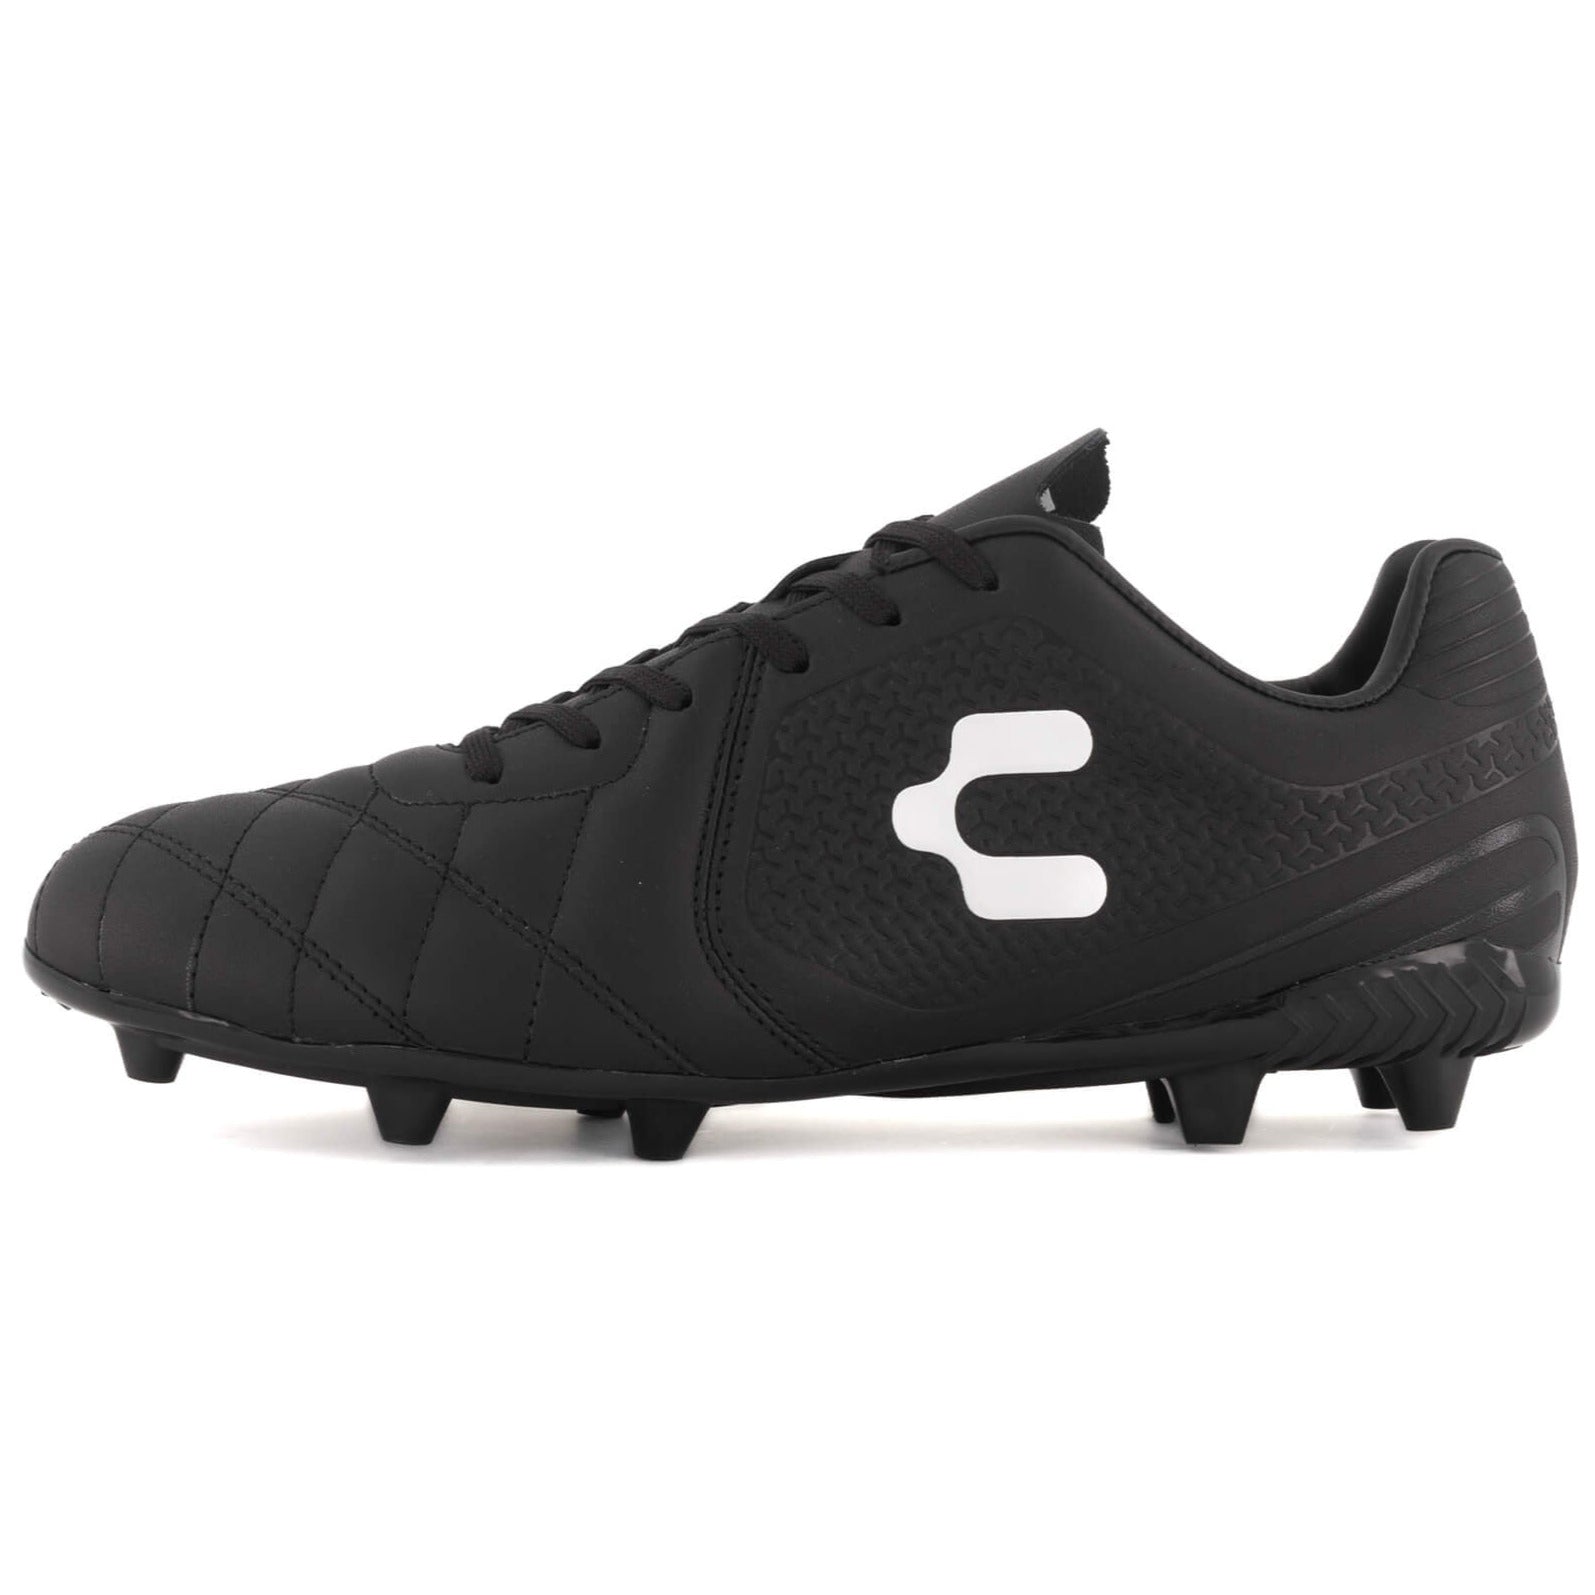 Charly Legendario 2.0 Leather Soccer Cleat